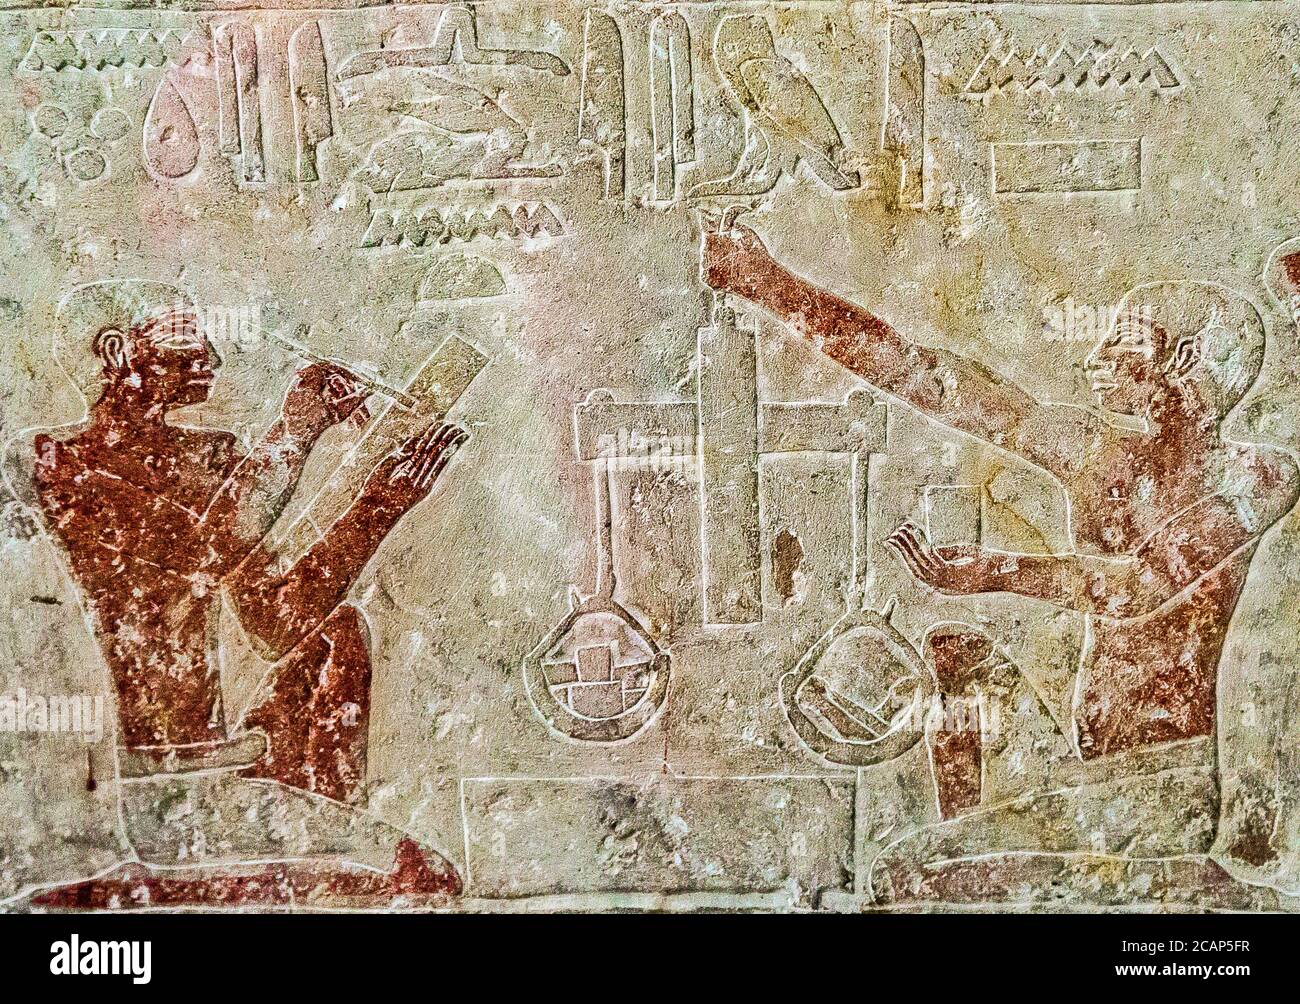 Egypt, Cairo, Egyptian Museum, from the tomb of Kaemrehu, Saqqara, detail of a big relief depicting craftsmen : Weighing gold. Stock Photo